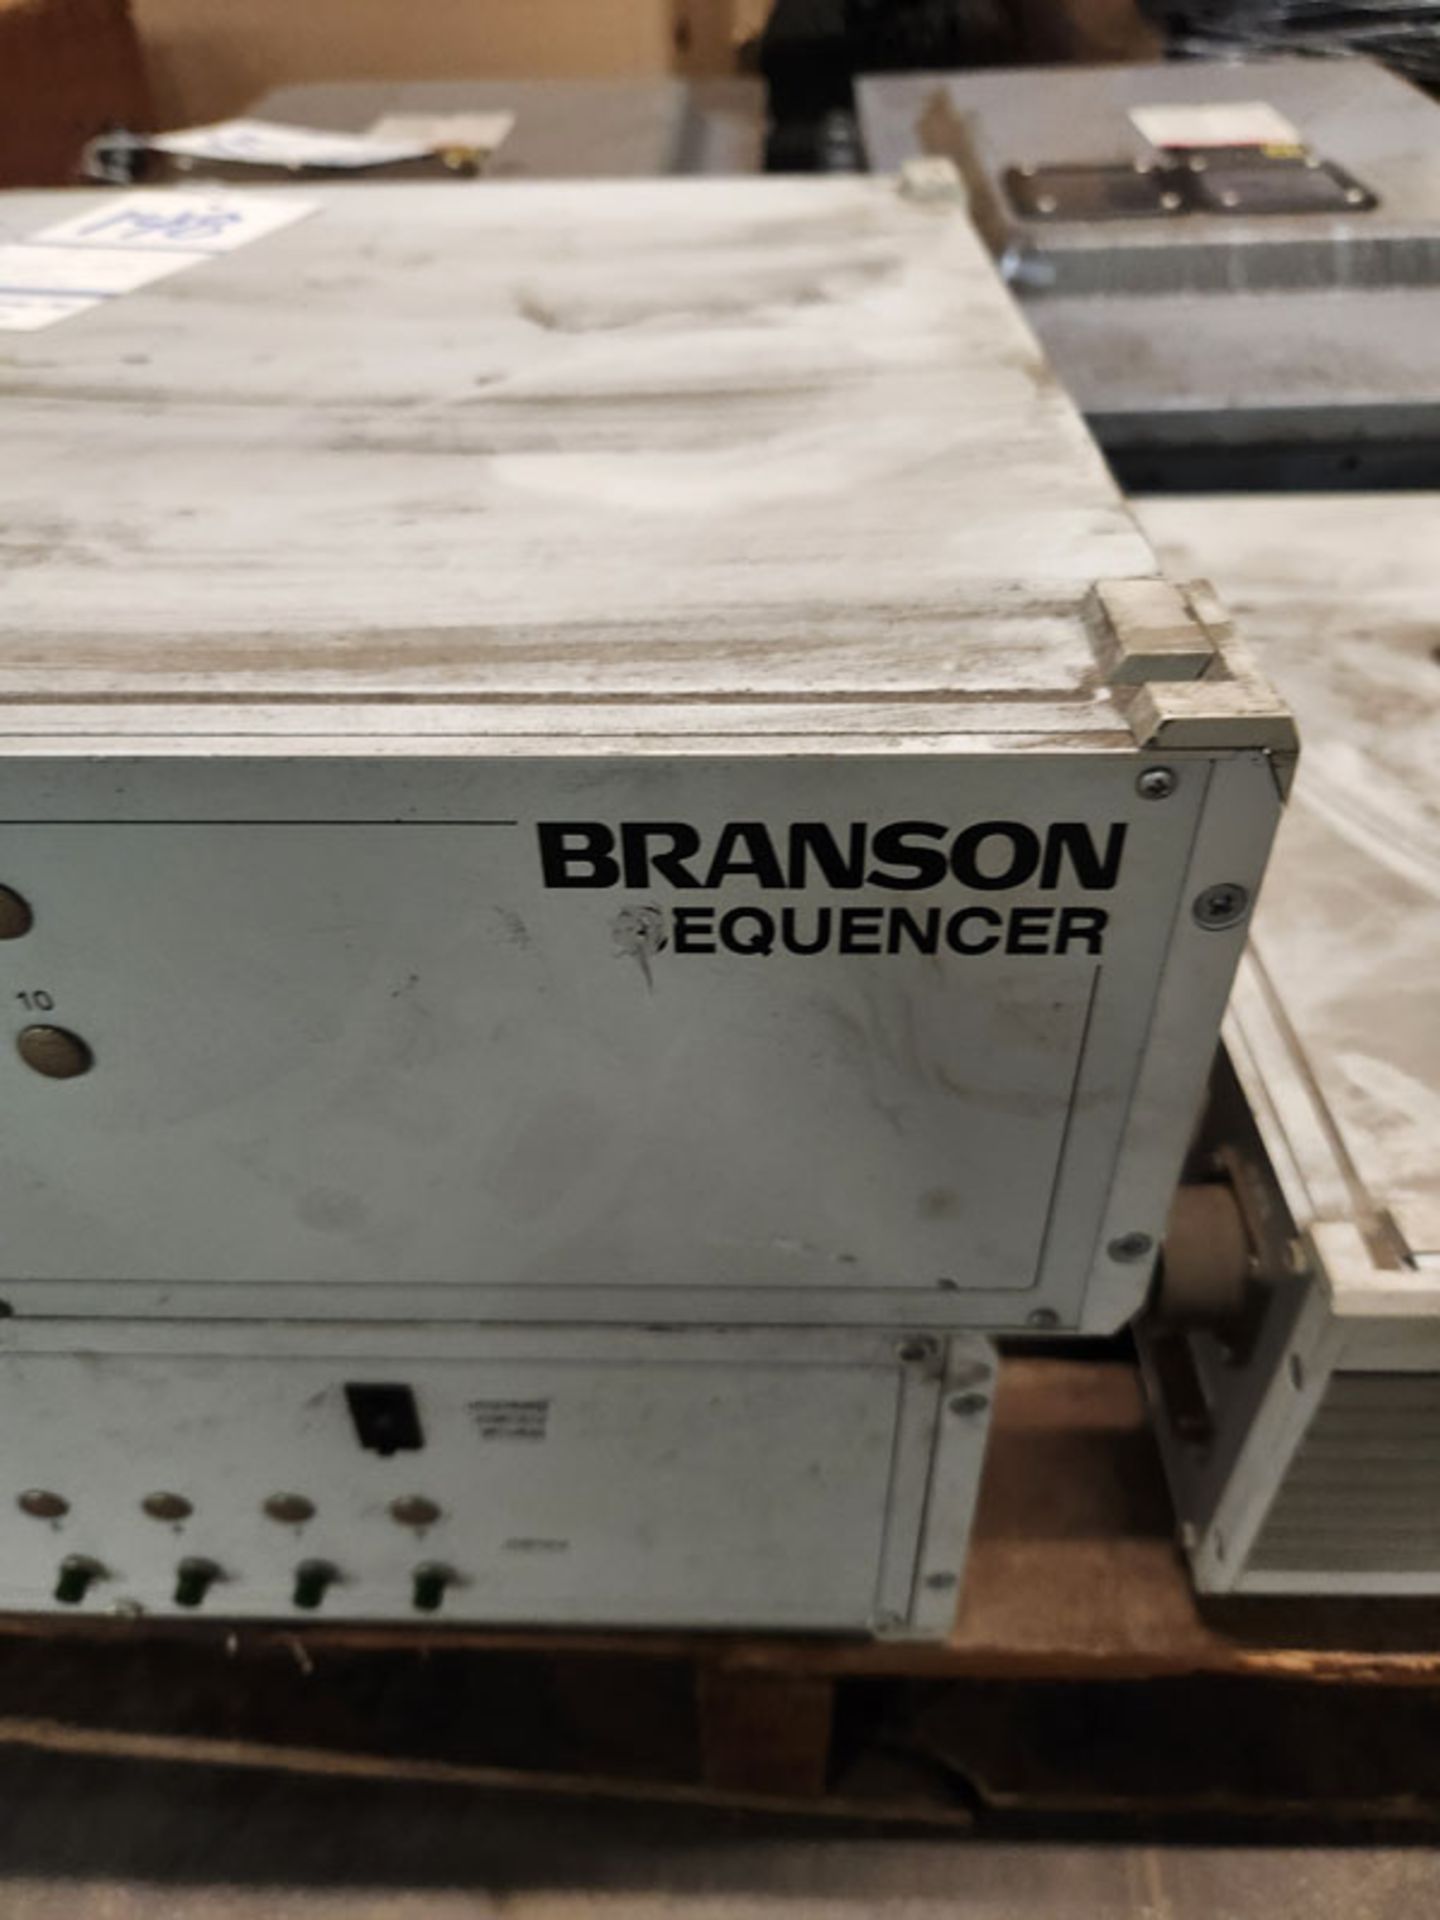 LOT OF 3 BRANSON 109-111-477 SEQUENCERS - Image 2 of 5